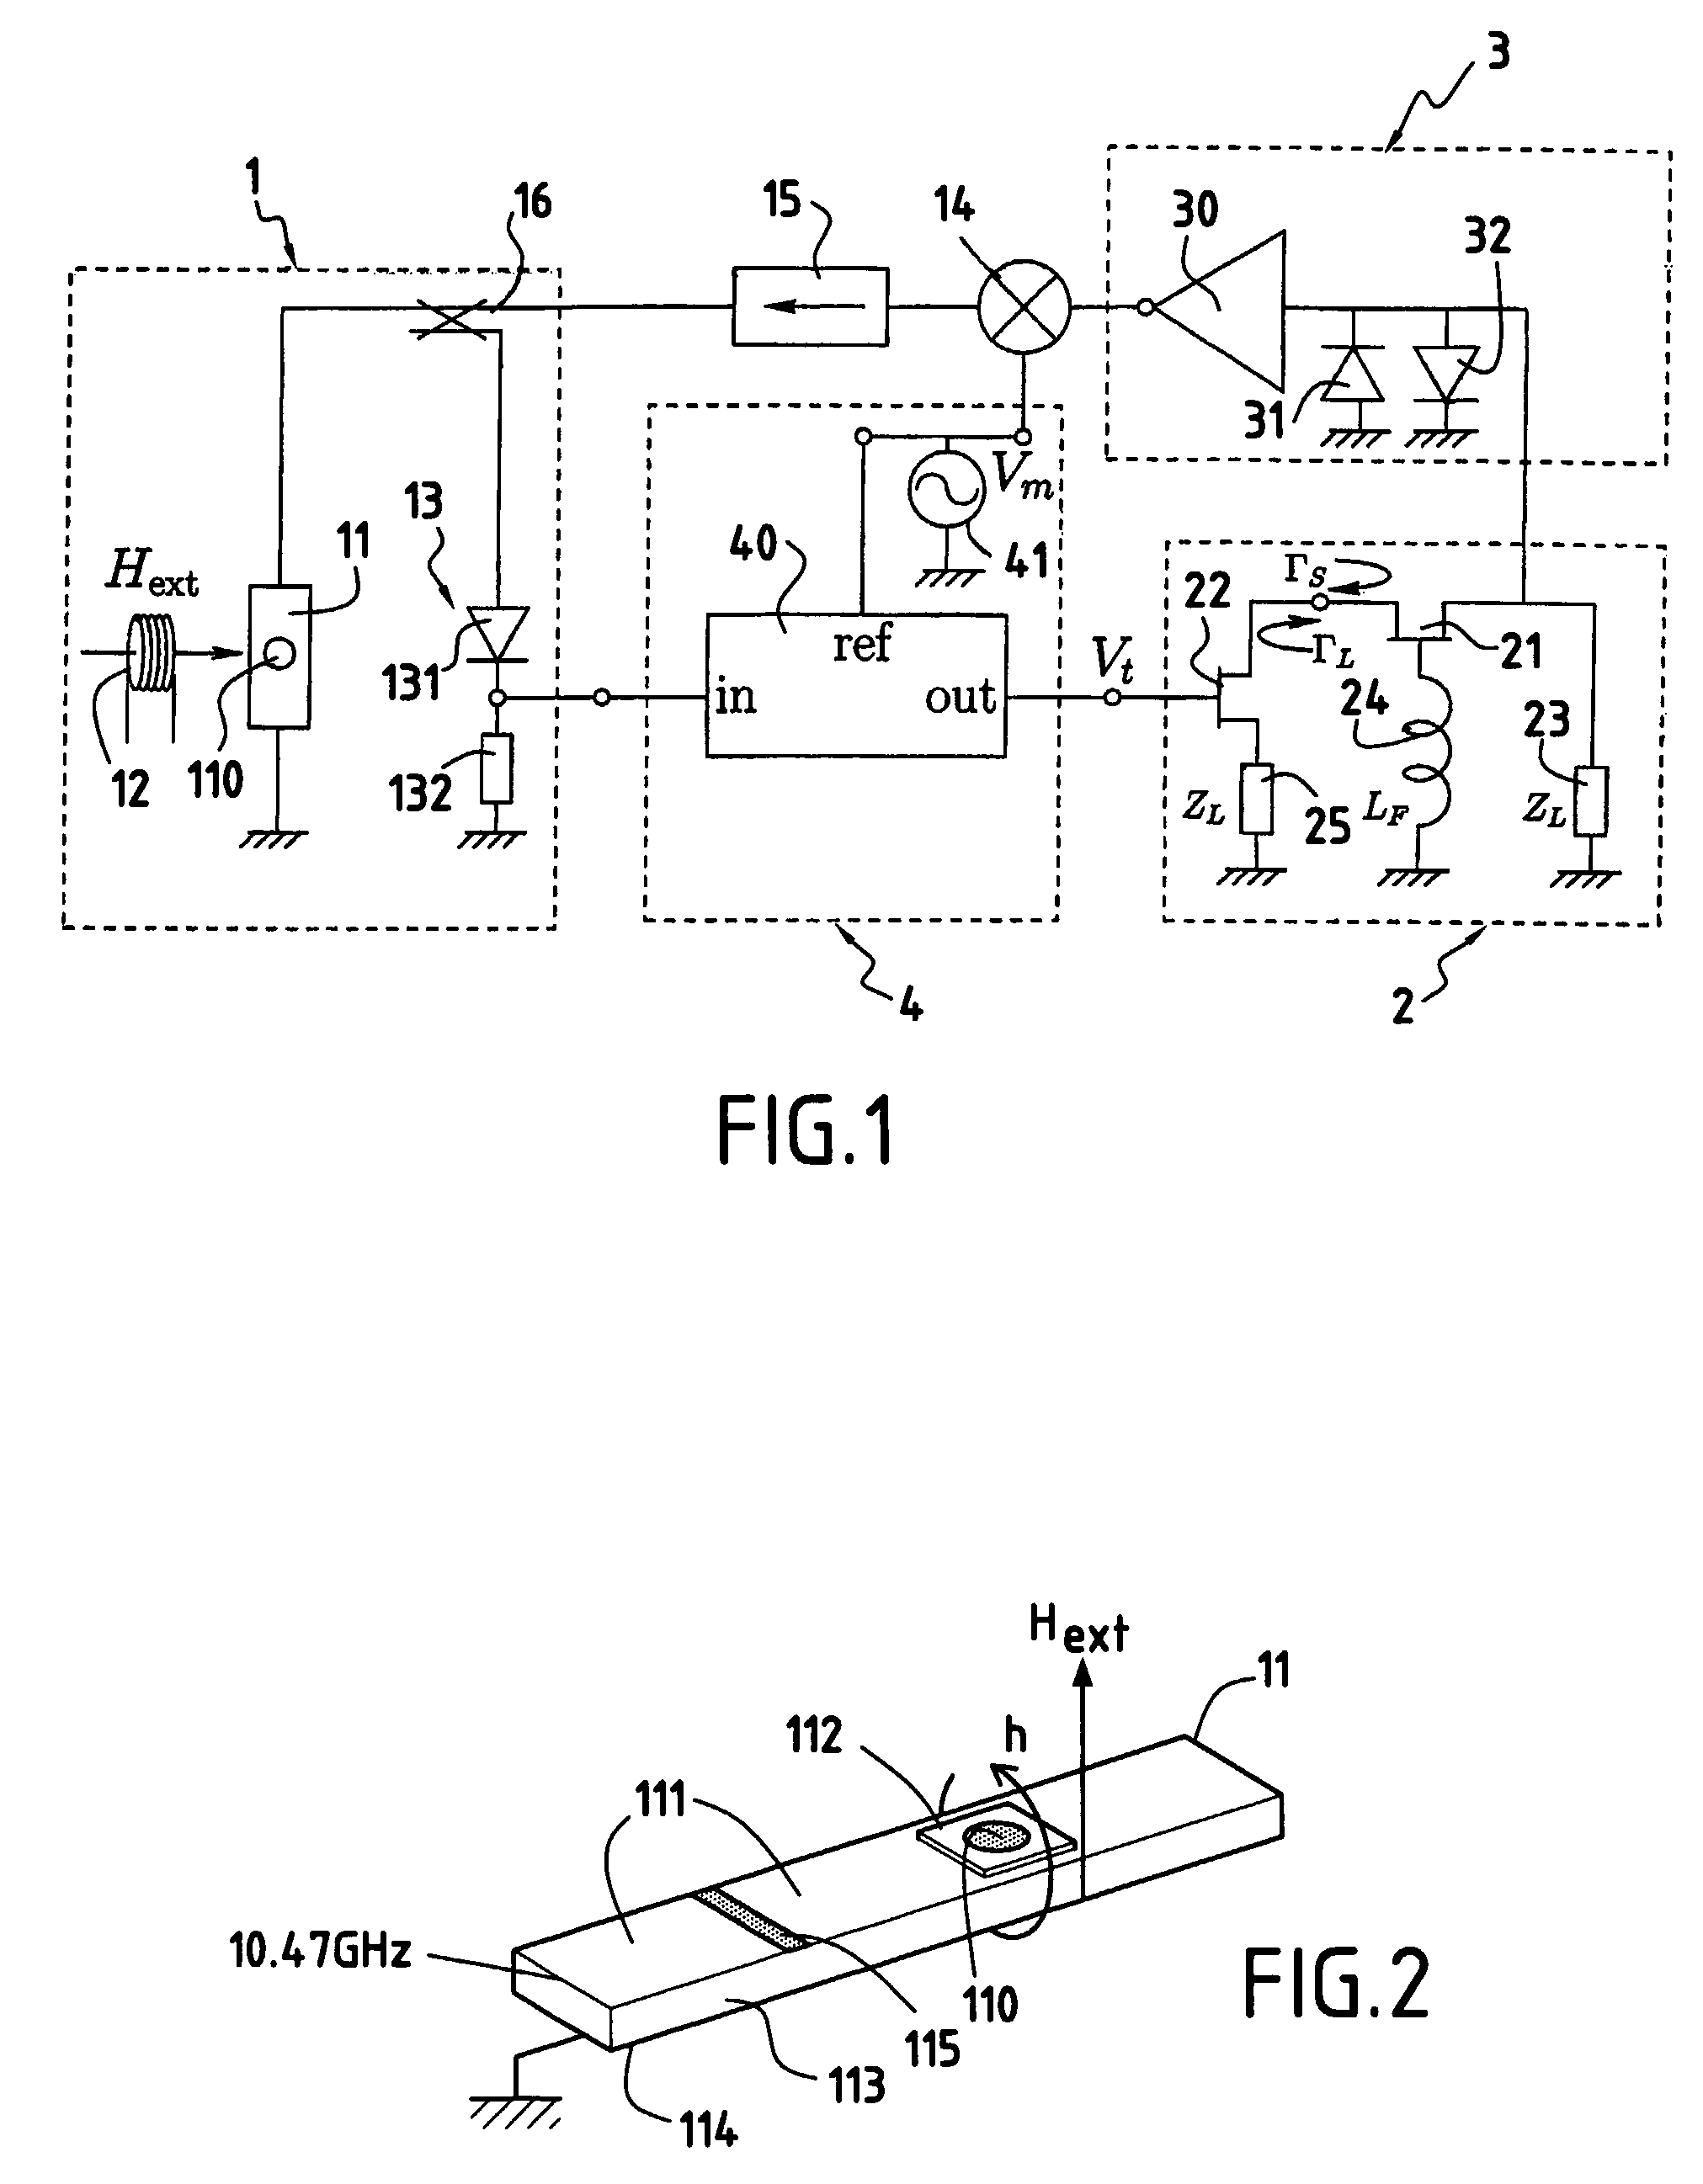 Microwave oscillator tuned with a ferromagnetic thin film